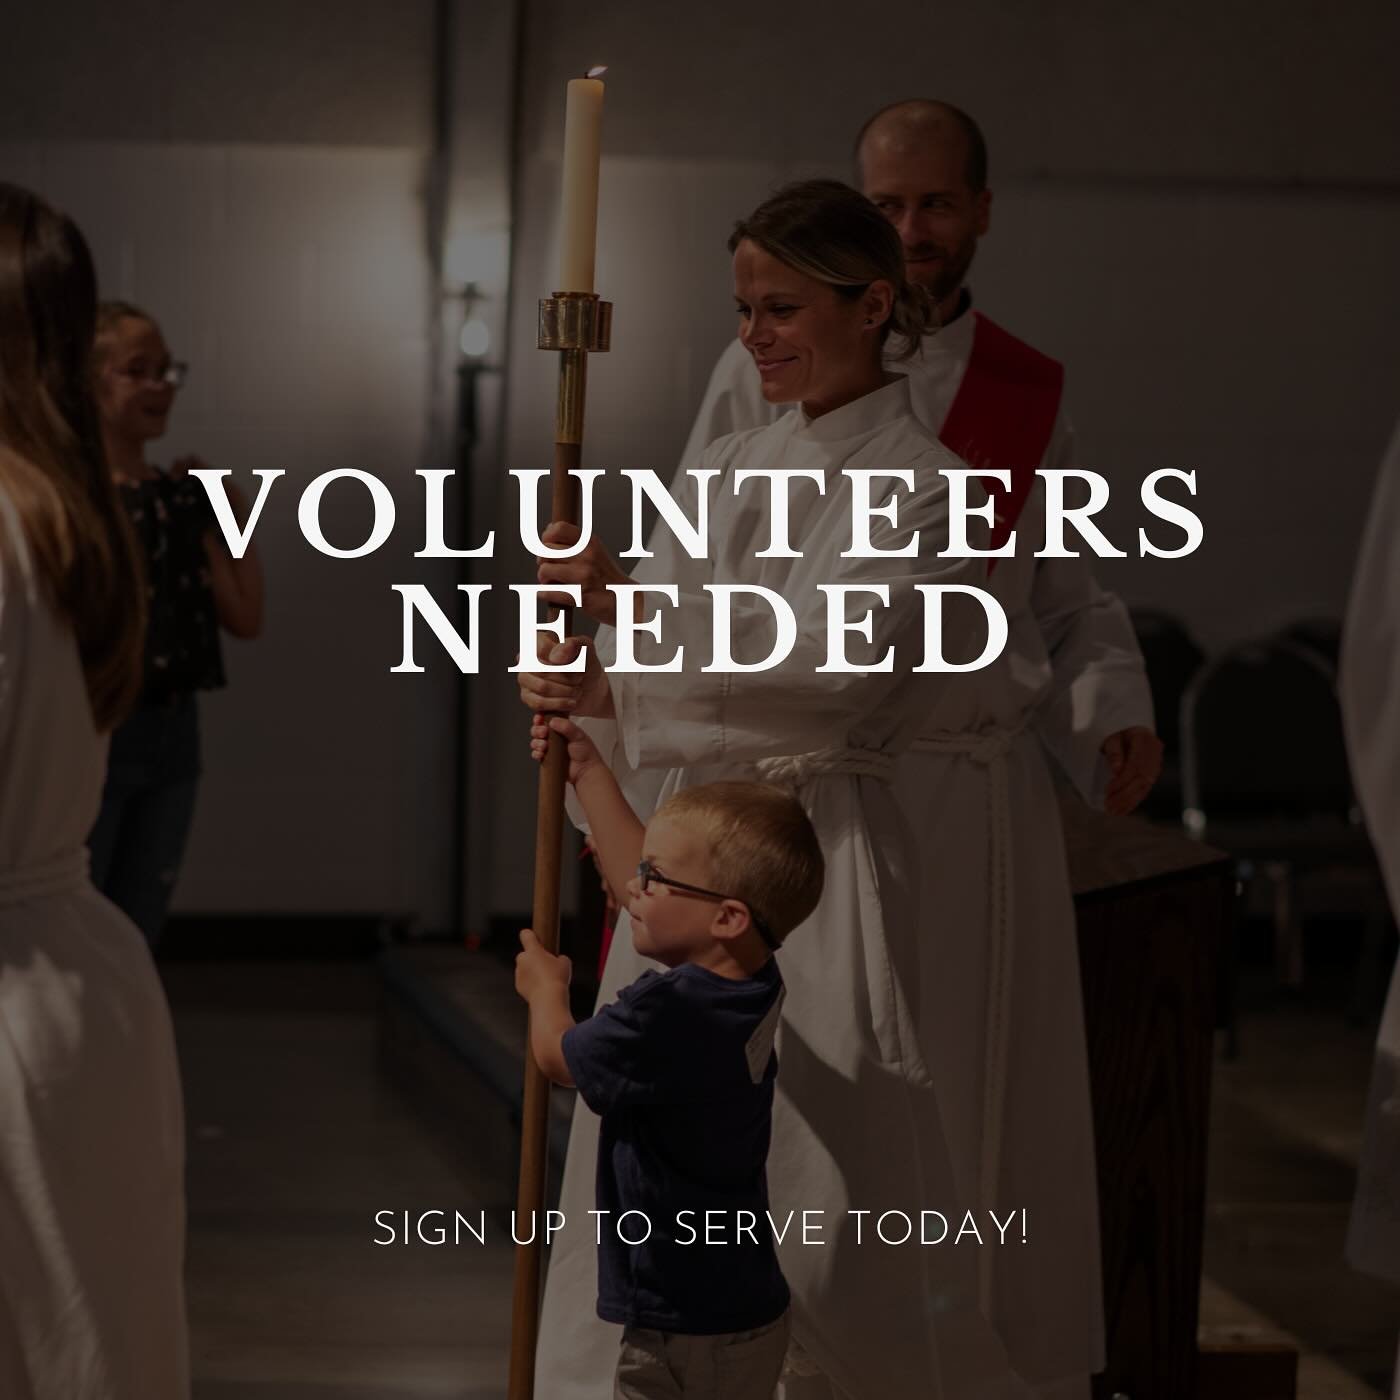 Interested in serving on one of our Volunteer Teams? We&rsquo;d love to have you! Our teams include:
&bull;Acolytes
&bull;Altar Guild
&bull;Design
&bull;Kids (0-12 years)
&bull;Singing &amp; Musicians
&bull;Prayer Team
&bull;Ushering
&bull;Welcome &a